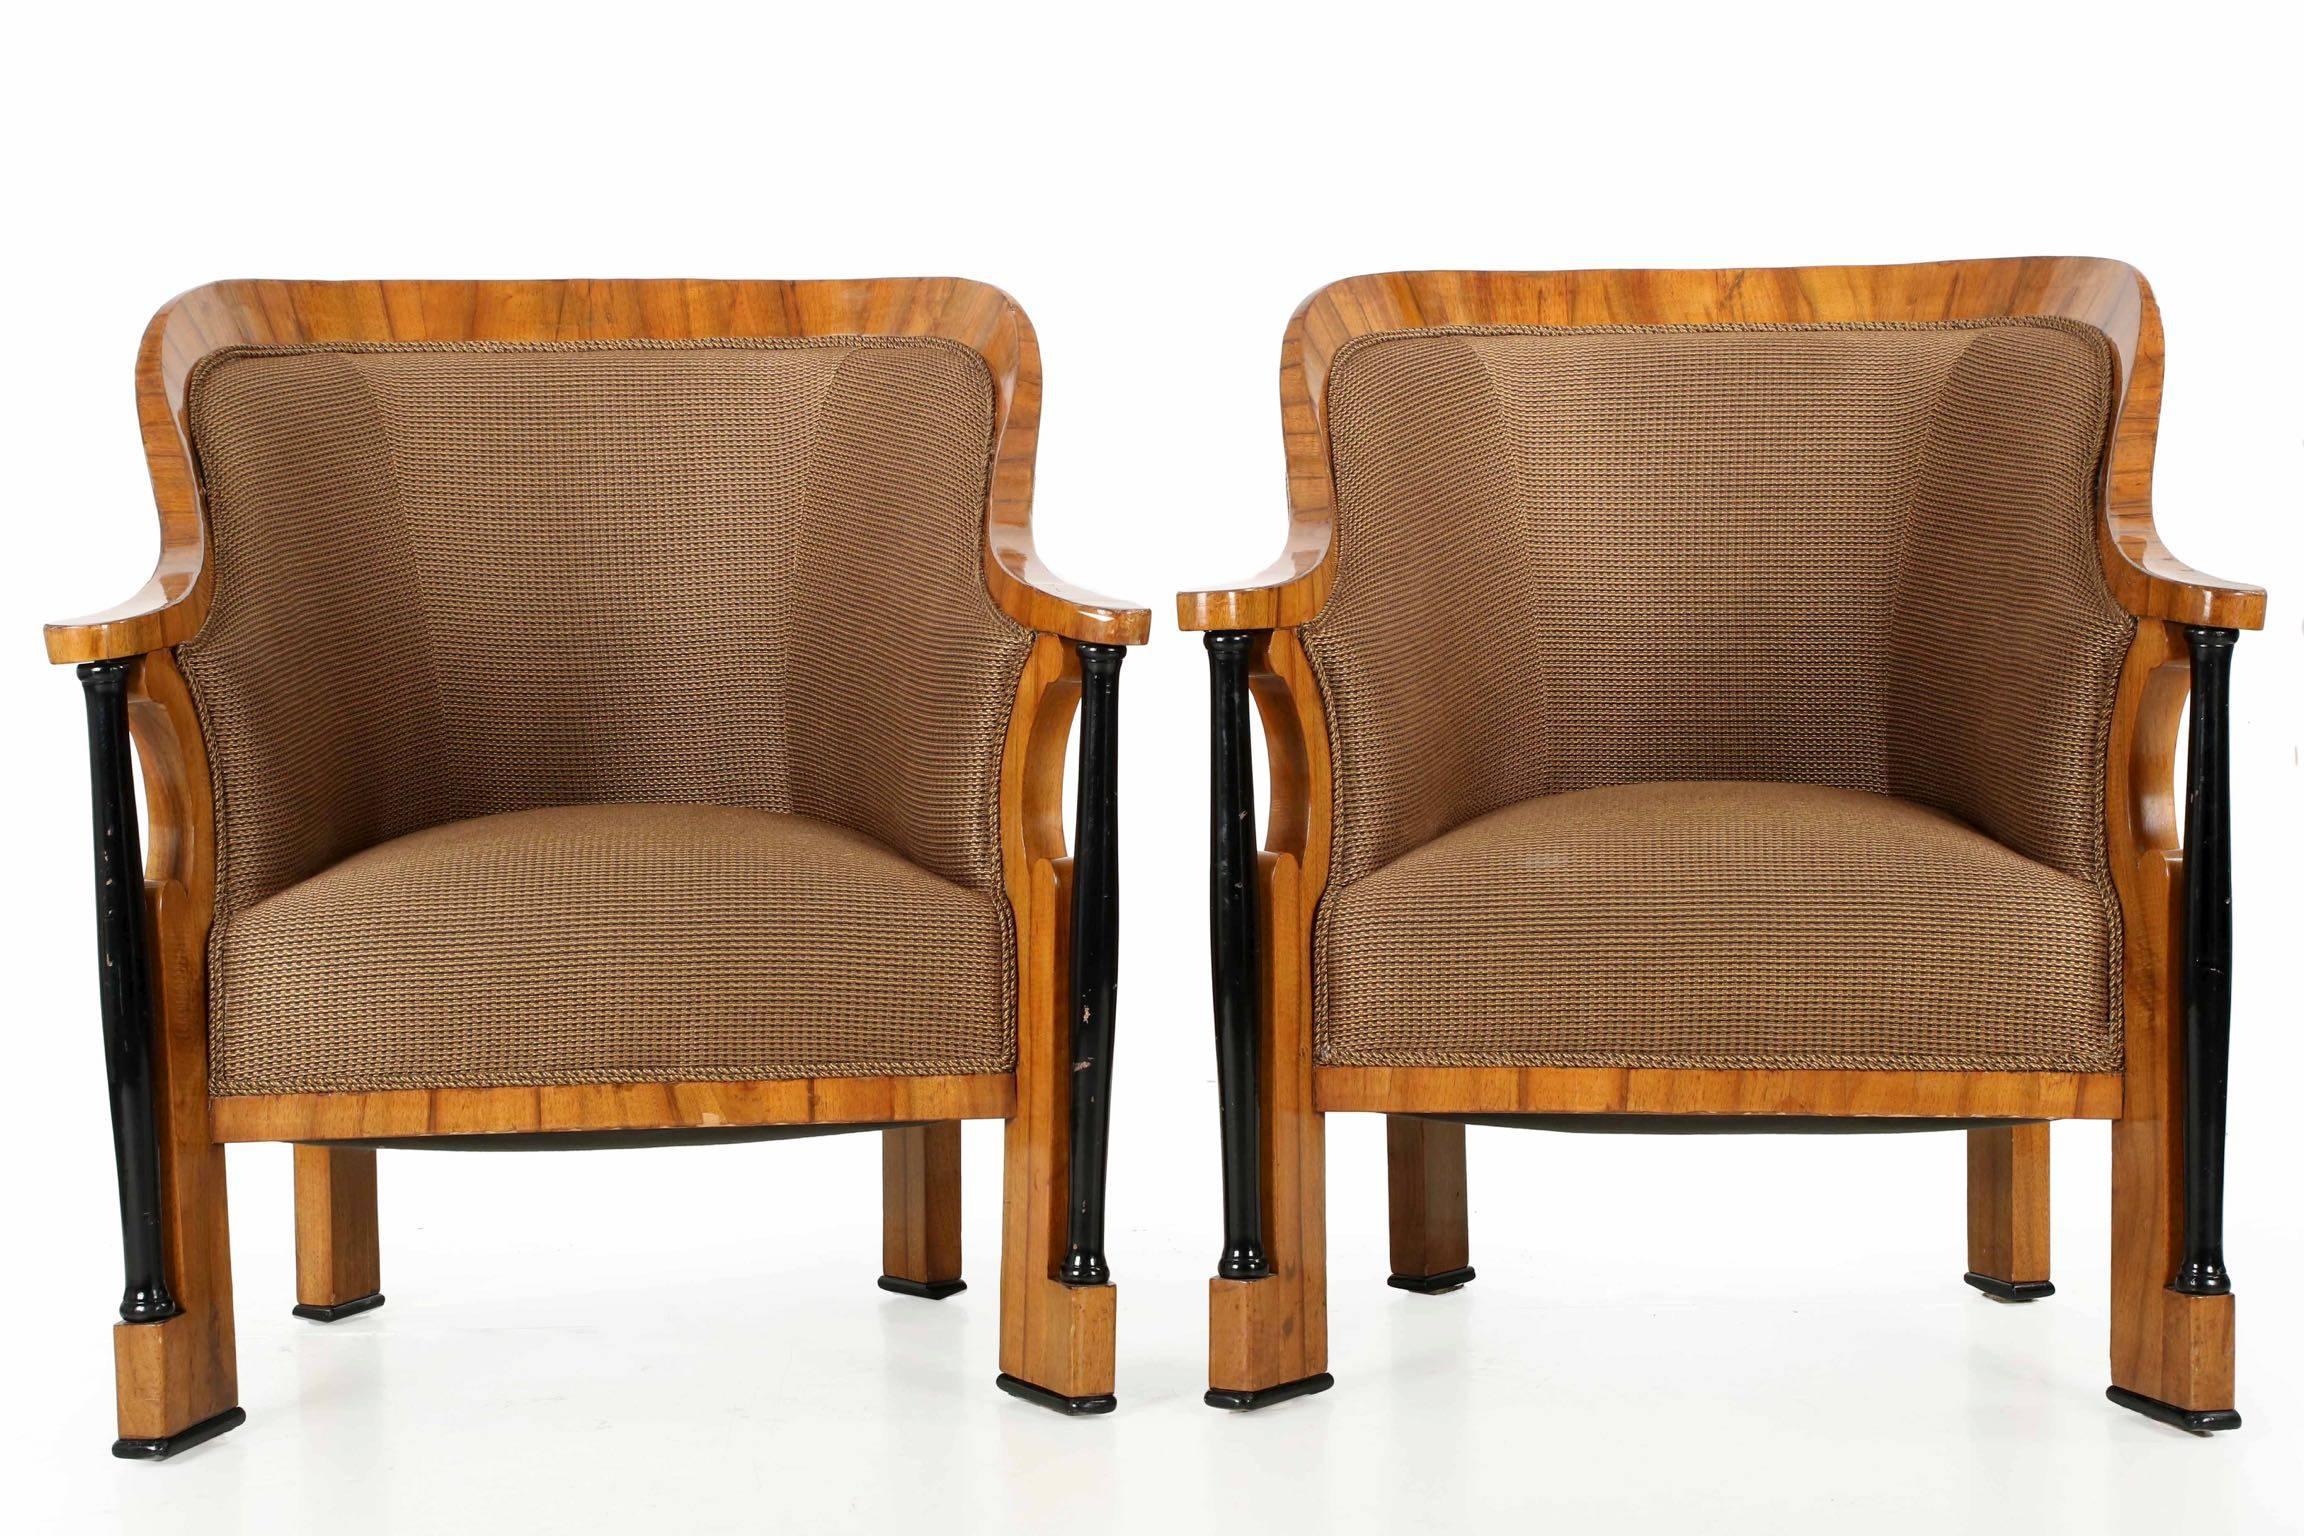 This exceptional pair of Biedermeier tub chairs make an incredibly powerful presentation with their unique and robust form. The exaggerated hoop of the back is faceted in a complex manner that allows the flat of the arm to taper into a sharp edge